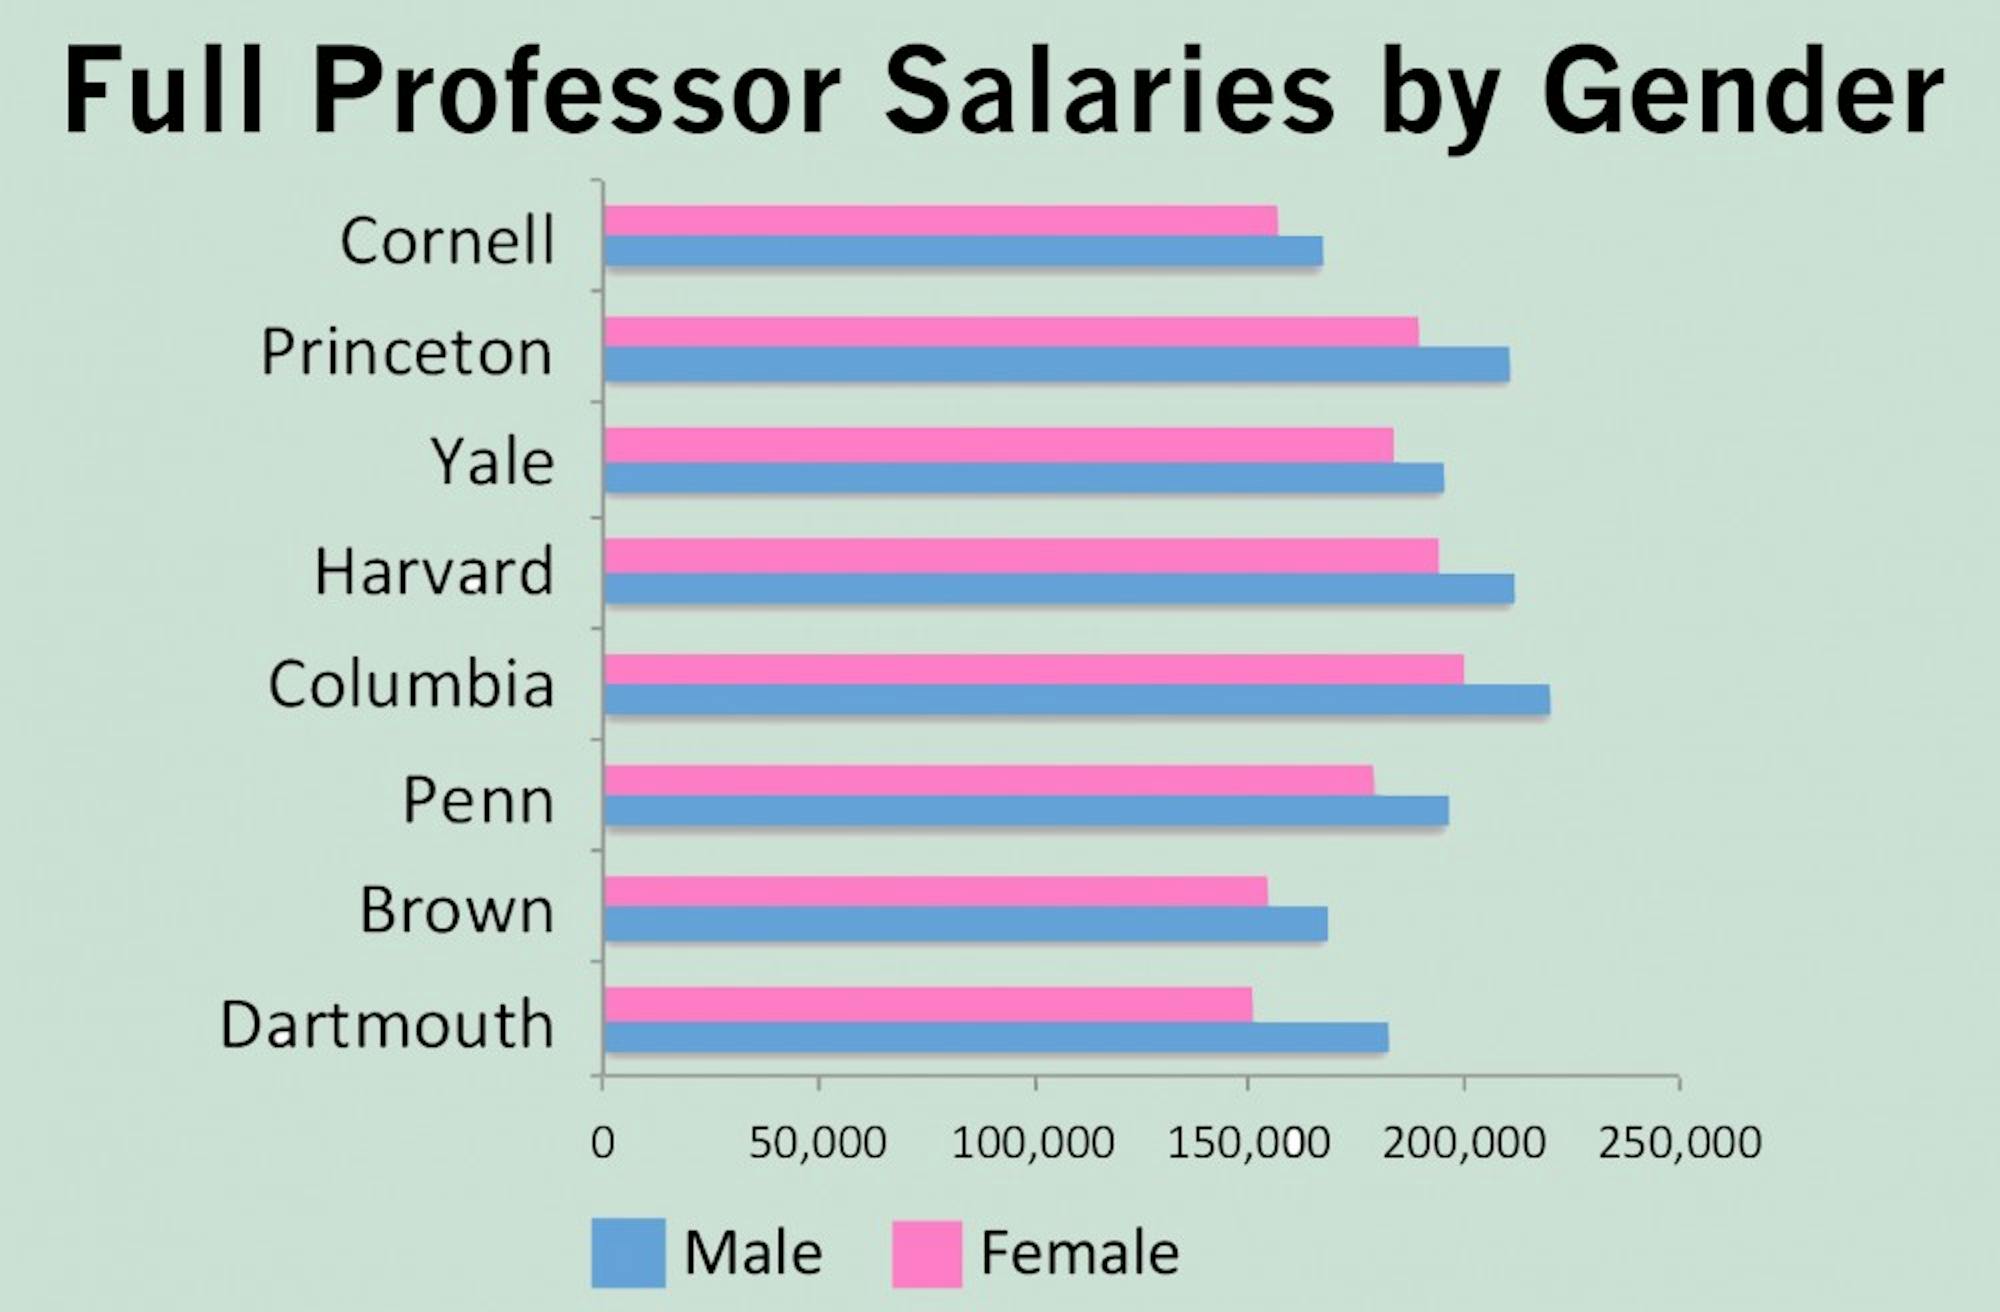 Dartmouth’s pay gap between male and female full professors has grown from last year’s figure.